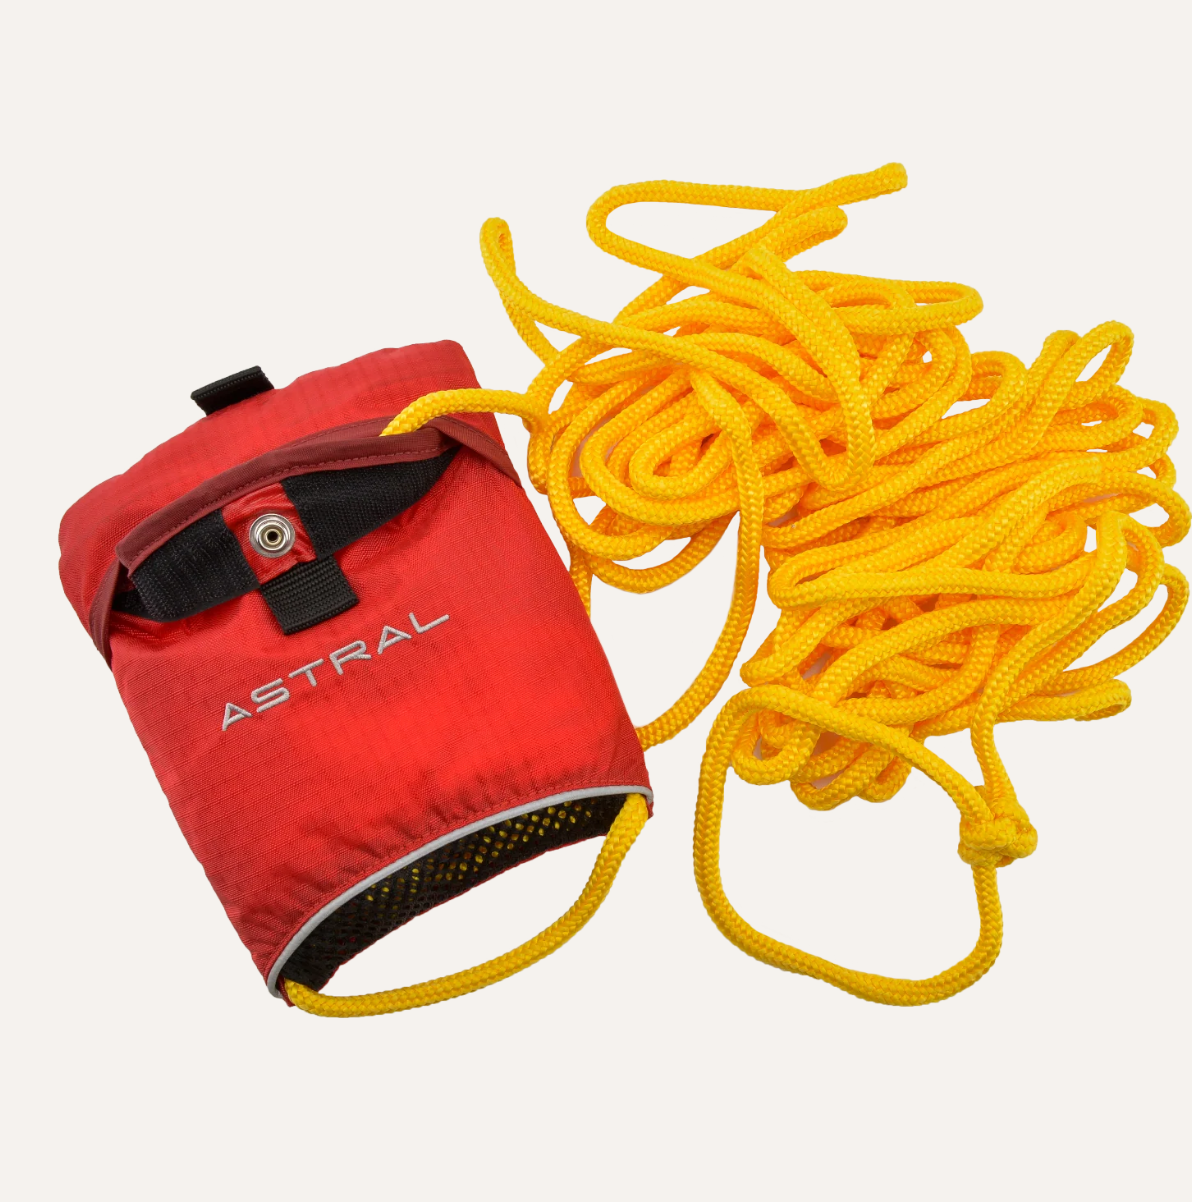 Astral Throw Bag rope pulled out of the back with logo side up